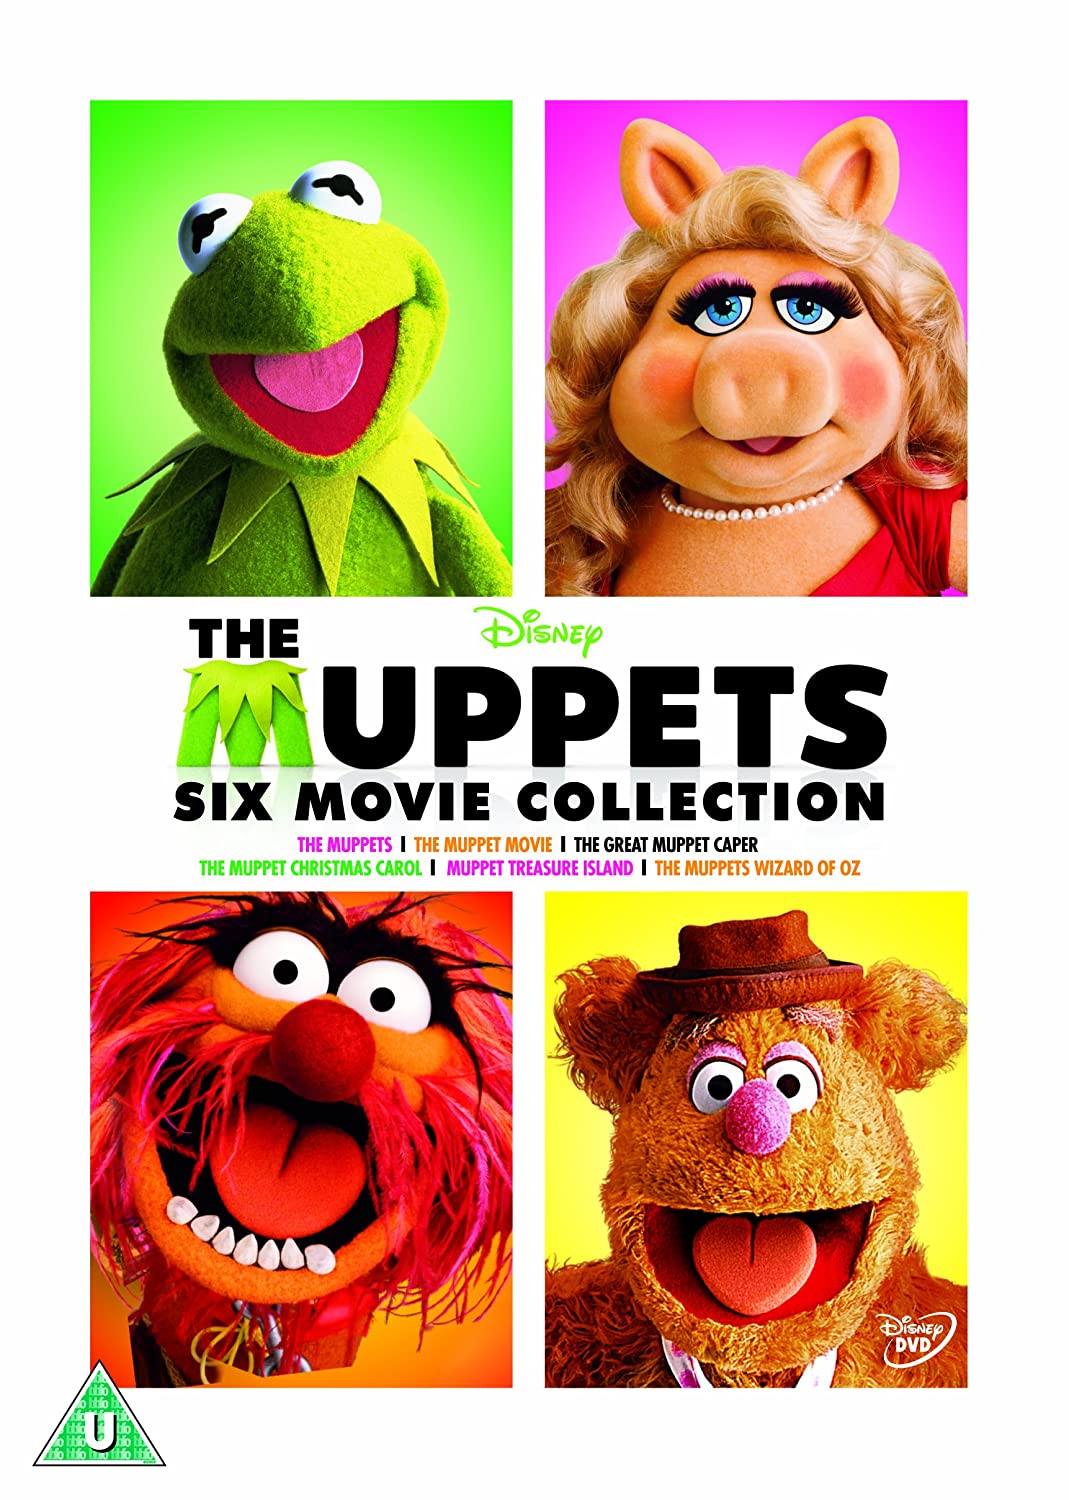 The Muppets 6 Film Collection' UK DVD release. Muppet Central Forum